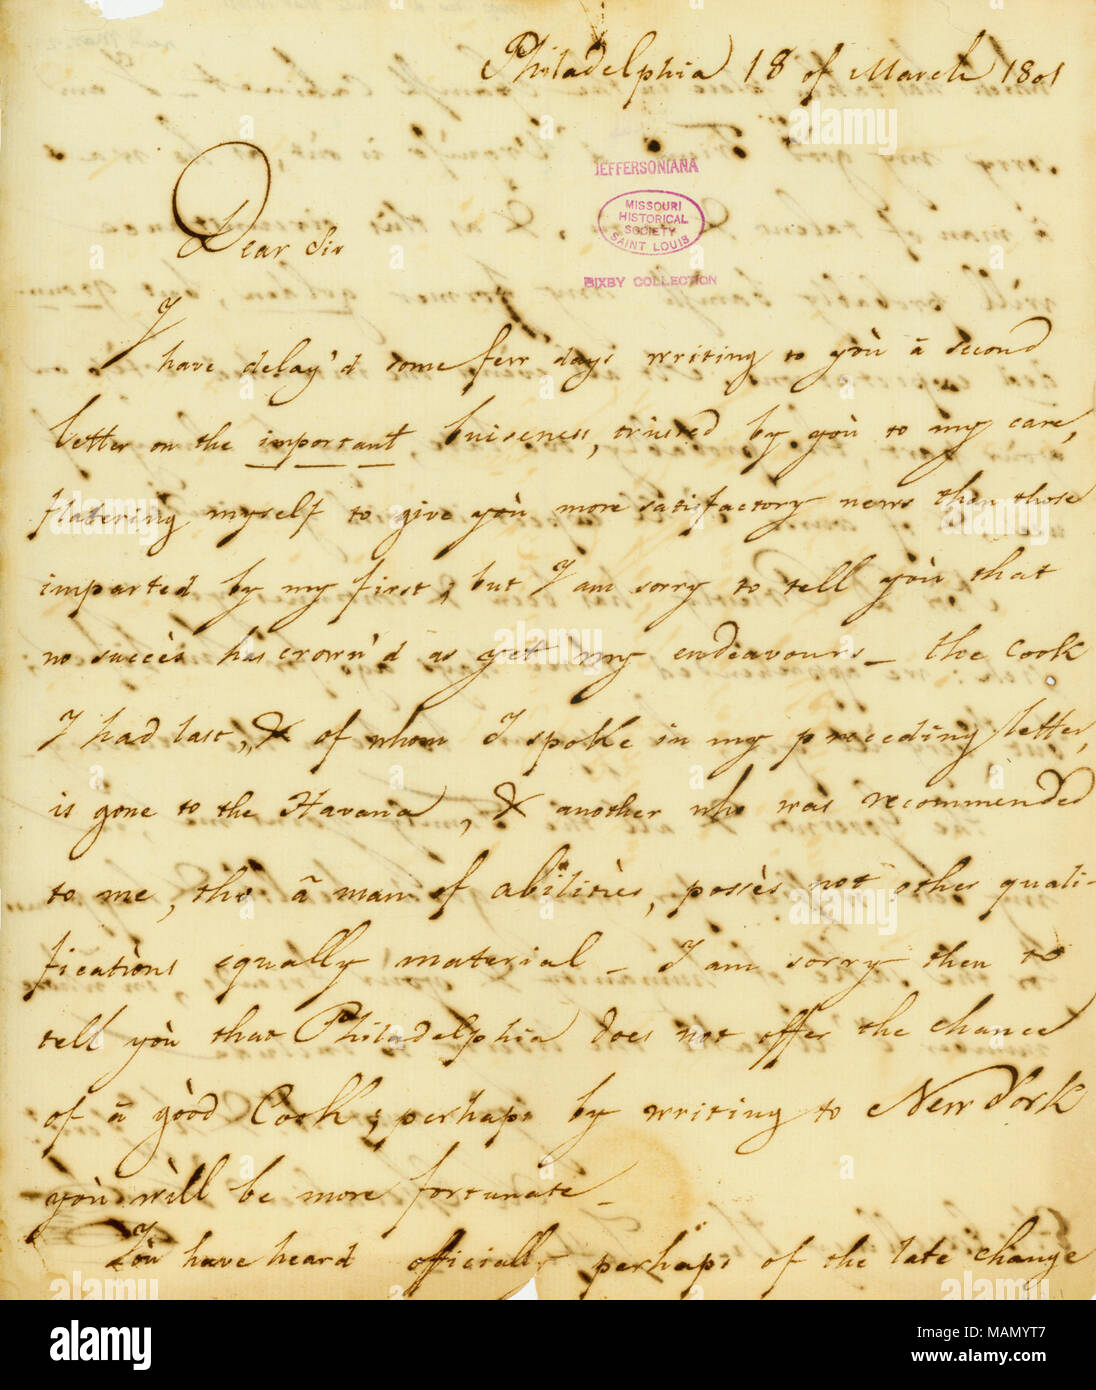 States that Jefferson ?s cook has gone to Havana, and asks if Jefferson has heard officially of the changes in the Spanish cabinet. Title: Letter from Le Chevalier d'Yrujo, Philadelphia, to Thomas Jefferson, March 18, 1801  . 18 March 1801. Stock Photo